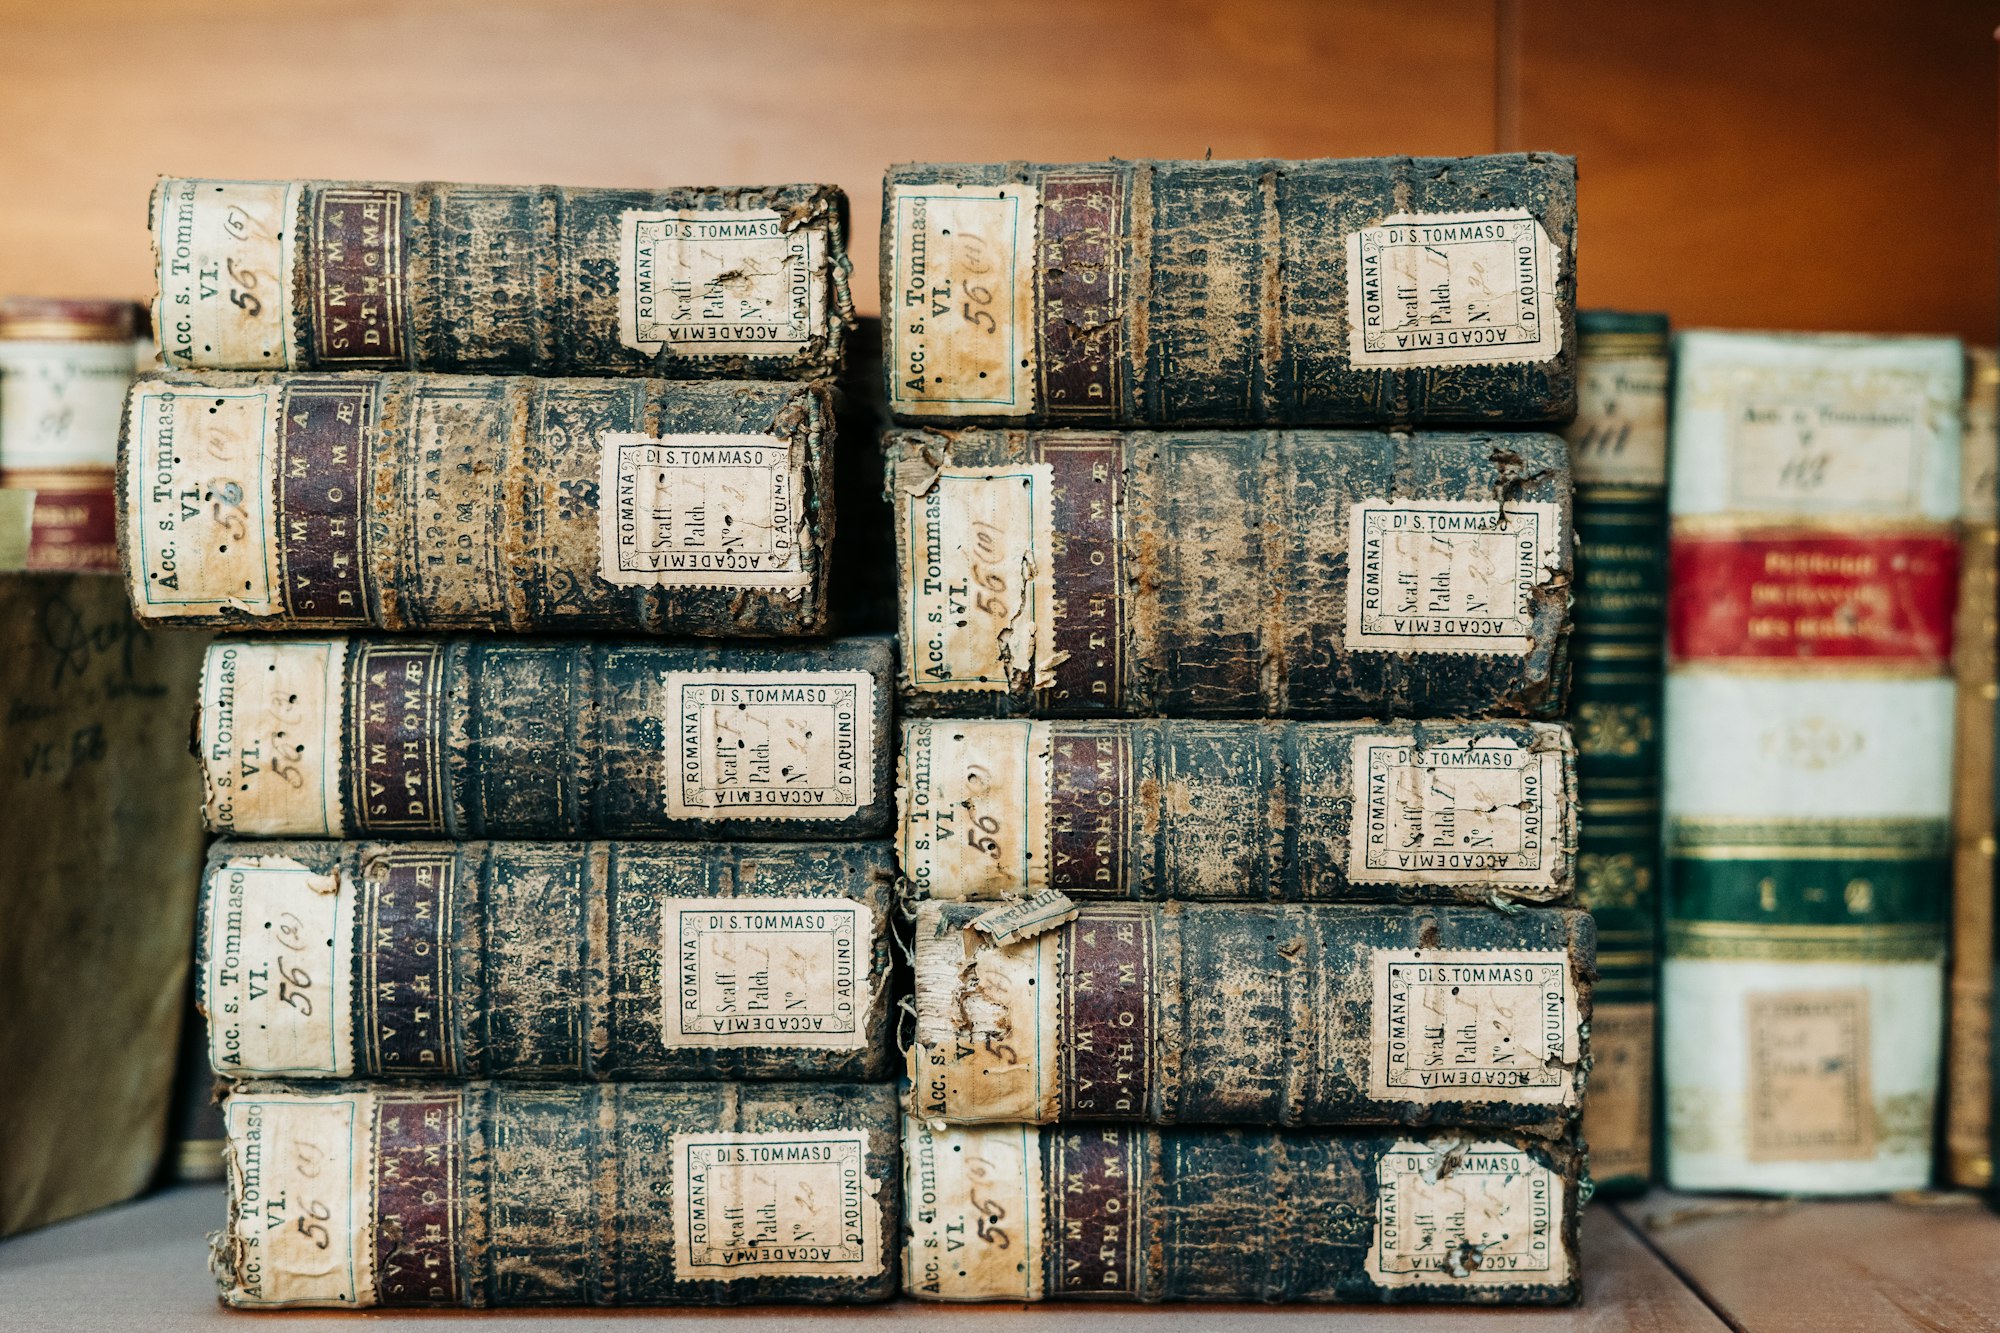 A stack of antique books on a shelf